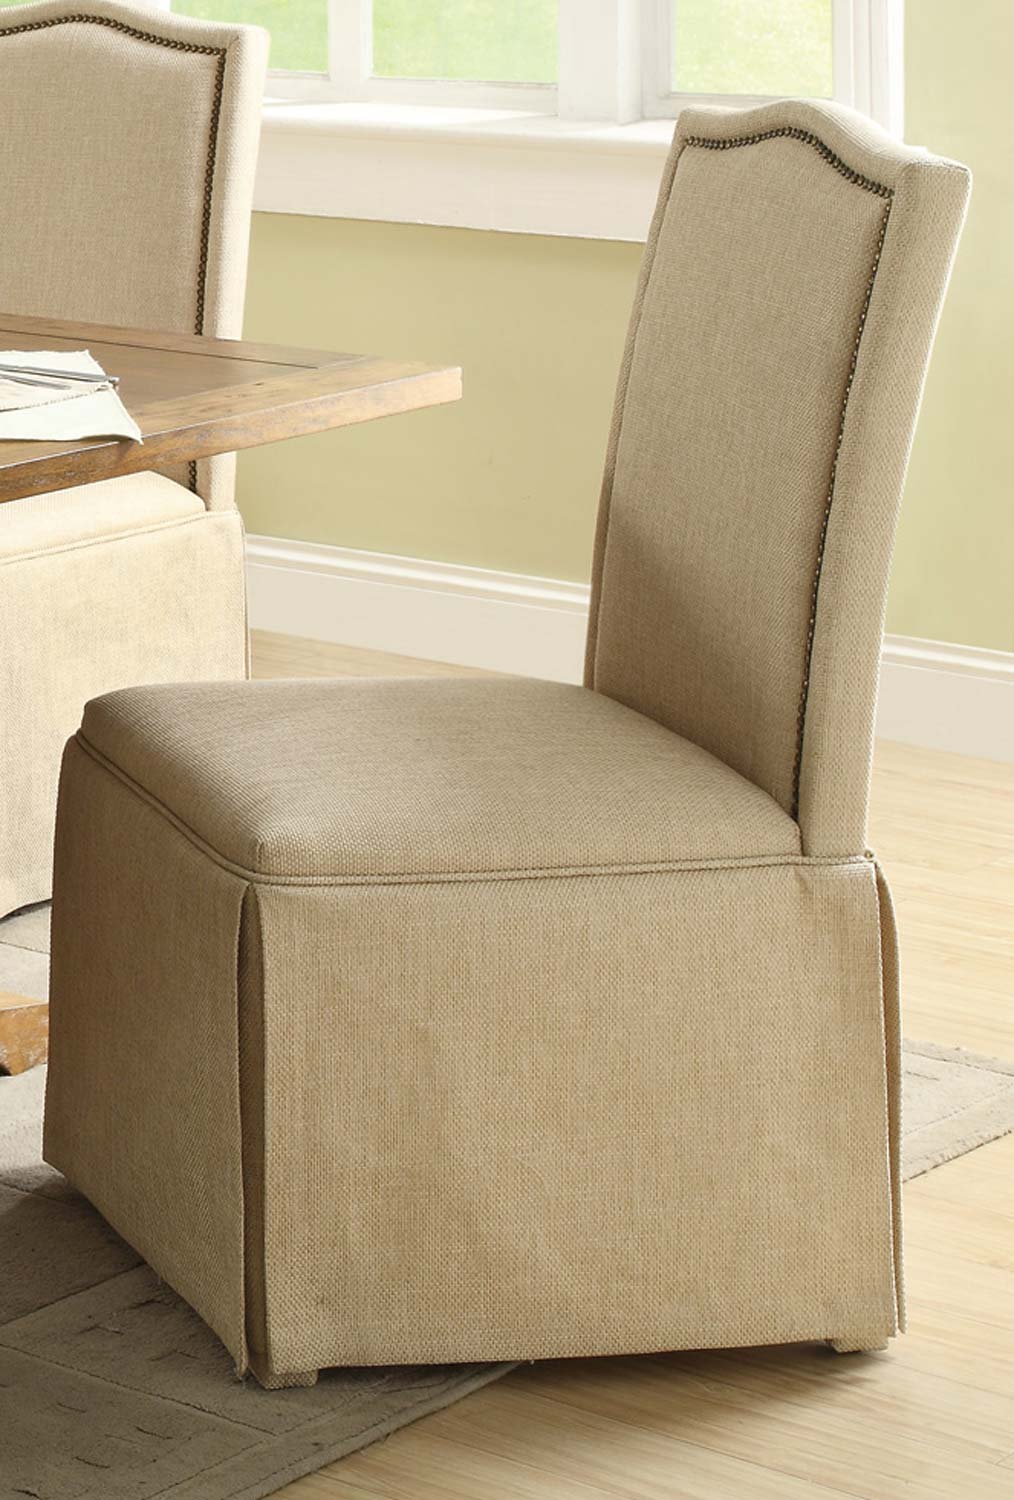 Coaster Parkins Parson Chair with Skirt - Coffee